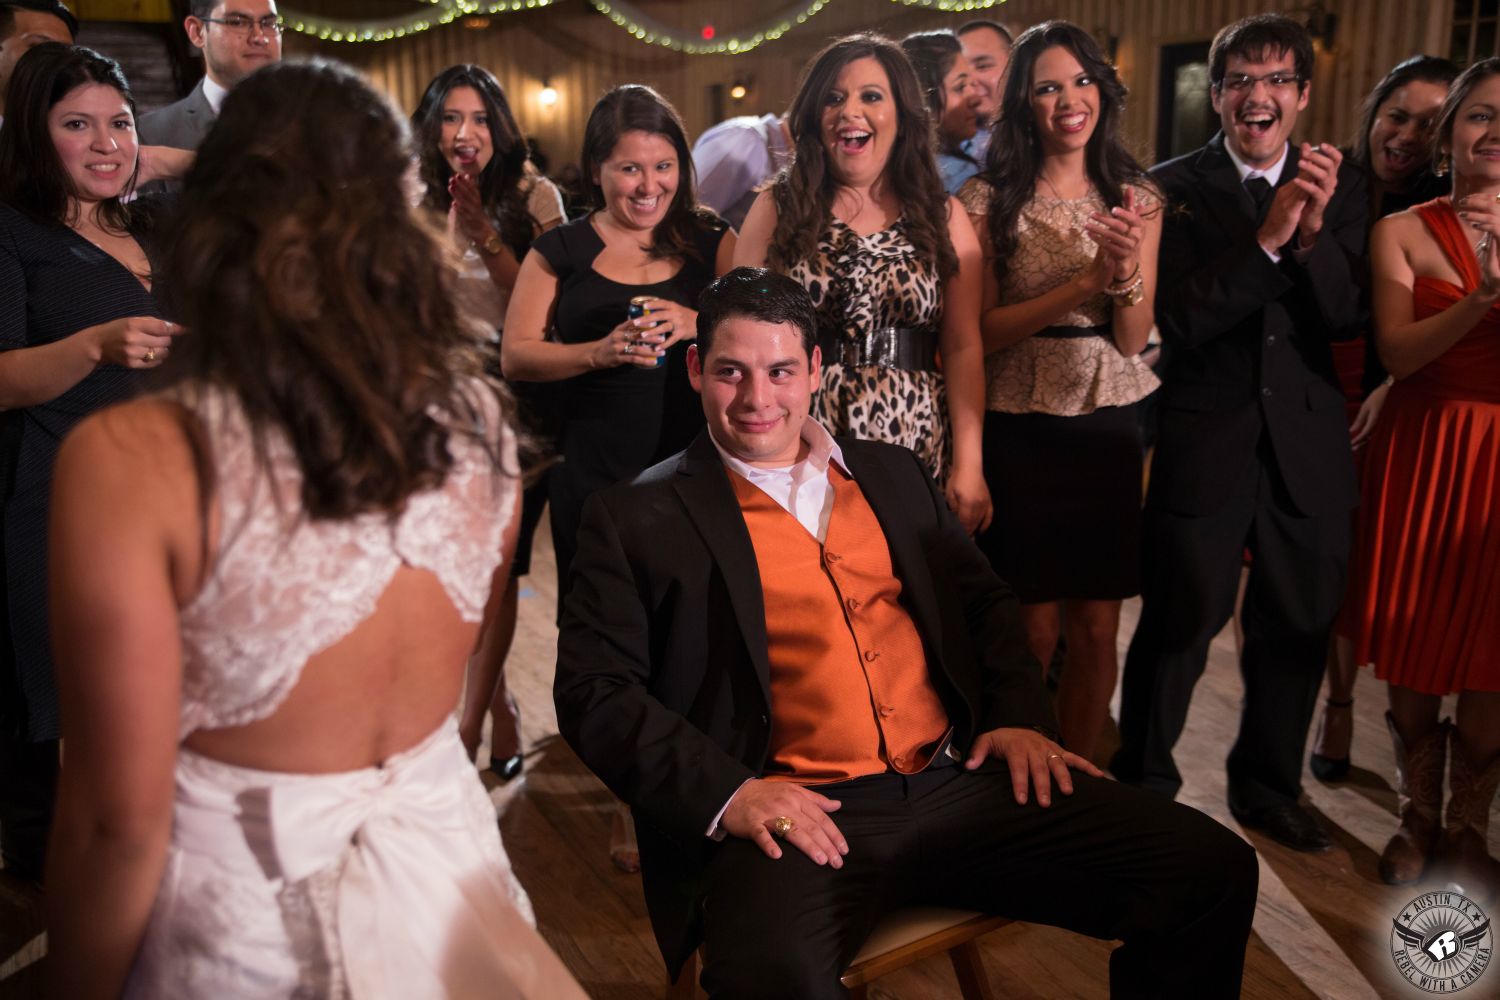 Groom in black tuxedo and orange vest sits in chair and looks at bride in backless wedding dress as she dances during wedding reception as guests look on and with twinkly lights in the background at Gabriel Springs austin area wedding venue.